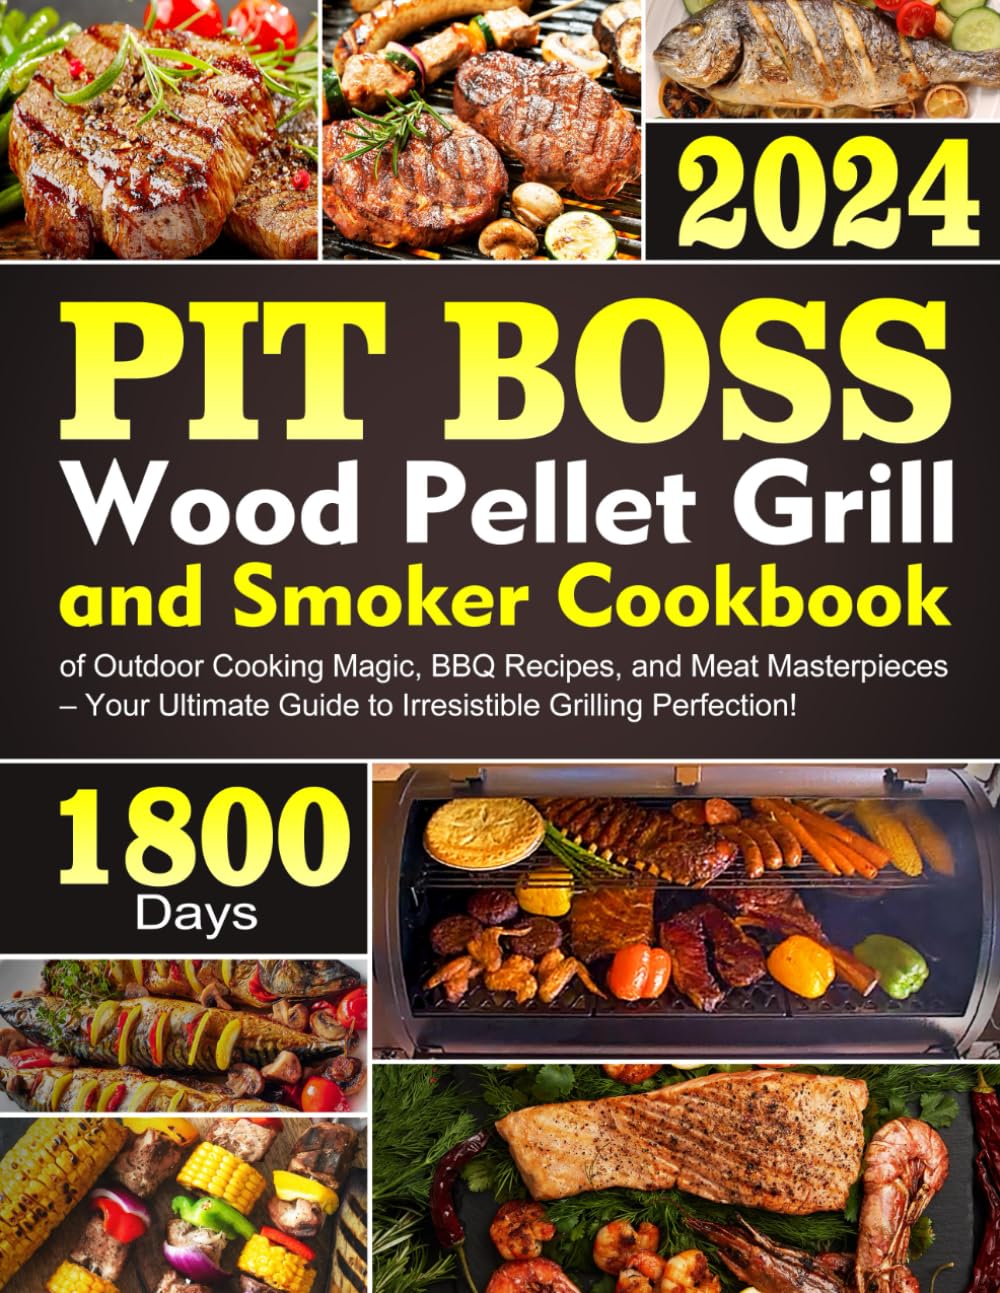 PIT BOSS Wood Pellet Grill and Smoker Cookbook: 1800 Days of Outdoor Cooking Magic, BBQ Recipes, and Meat Masterpieces – Your Ultimate Guide to Irresistible Grilling Perfection!